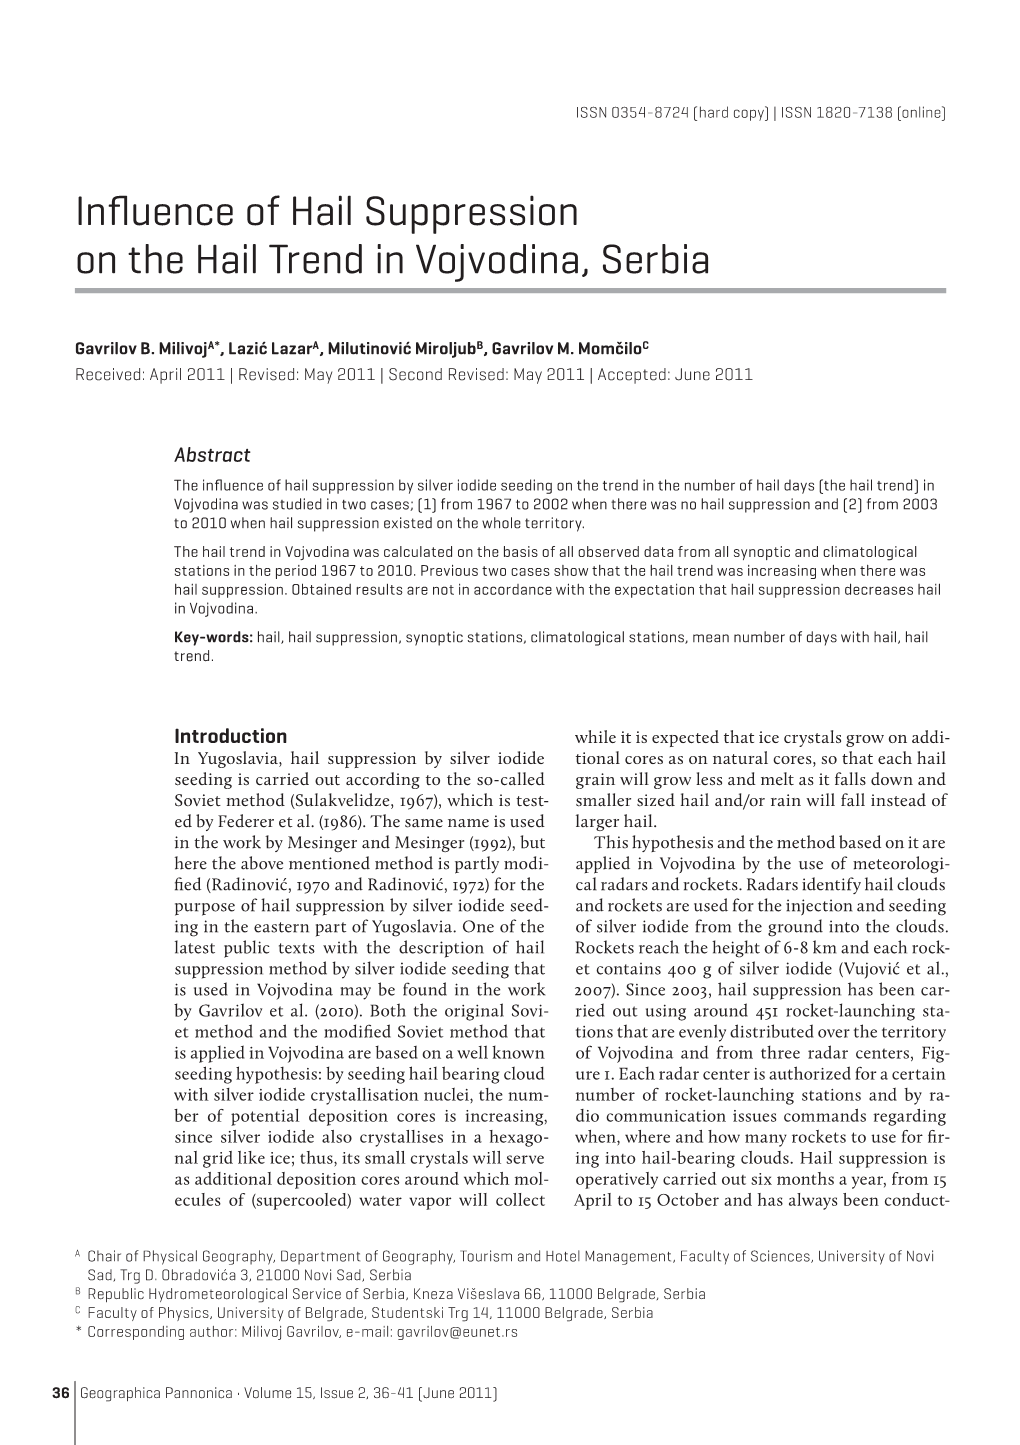 Influence of Hail Suppression on the Hail Trend in Vojvodina, Serbia